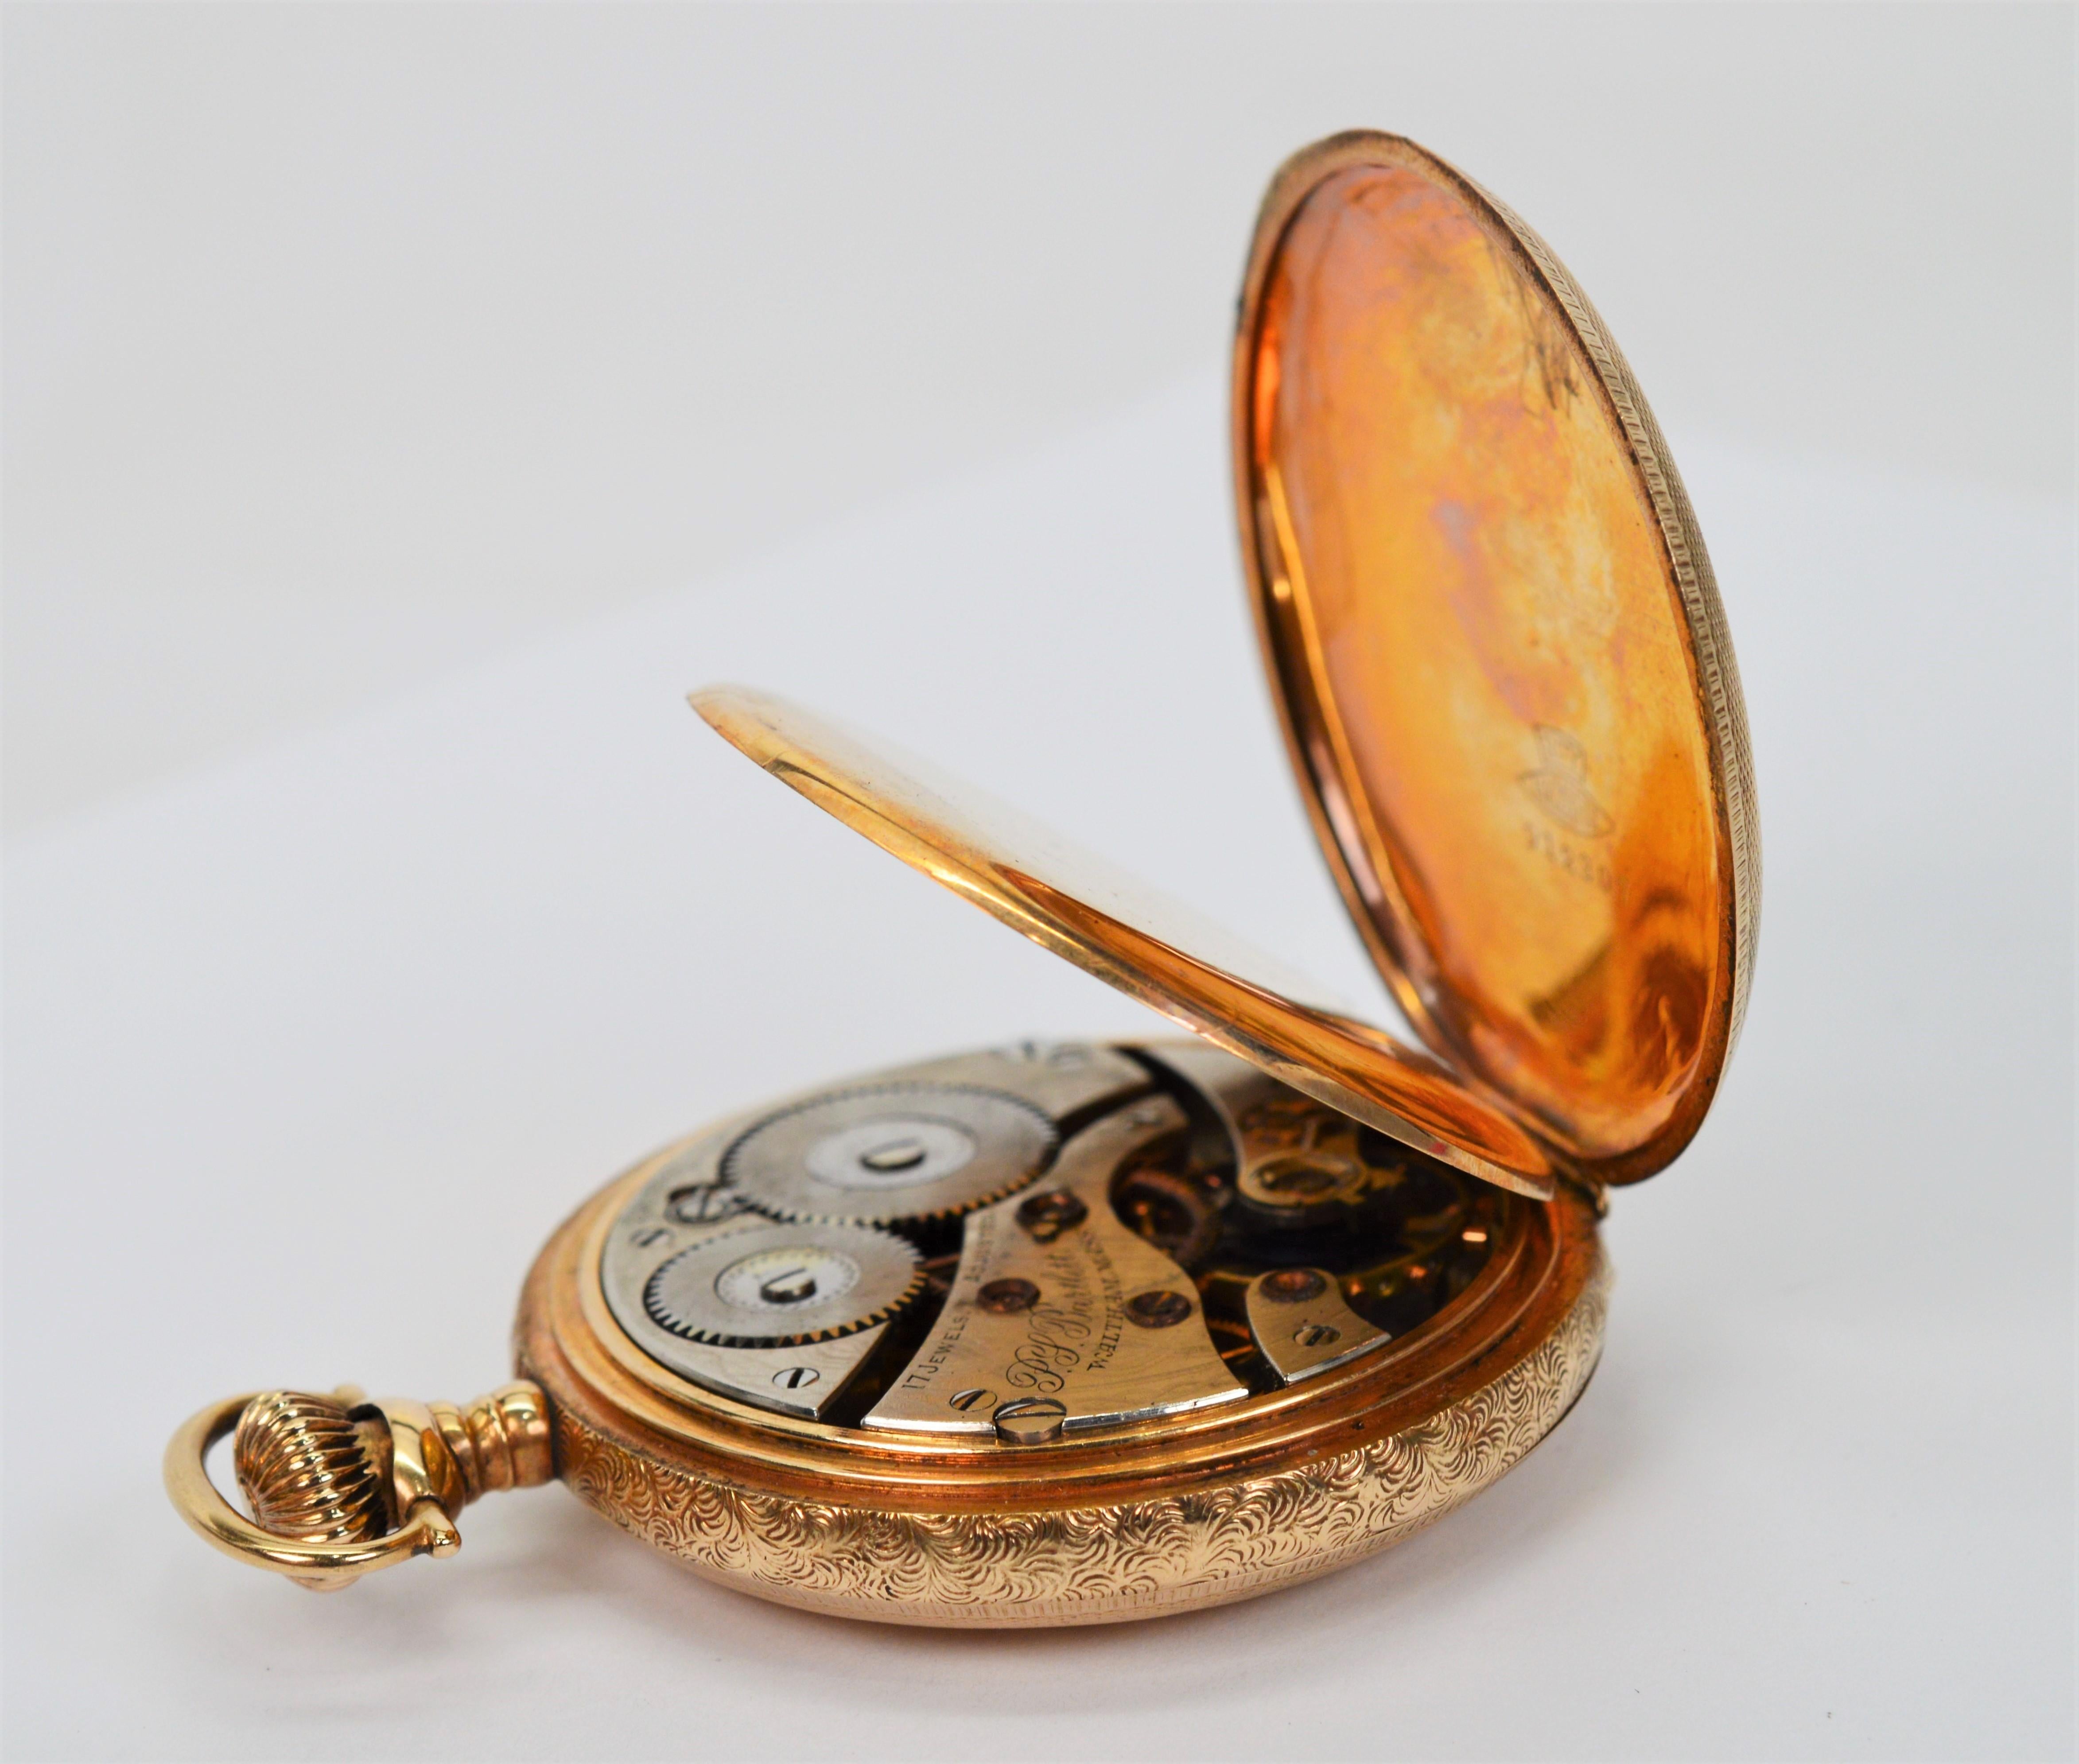 American Waltham Watch Company 14 Karat Yellow Gold Pocket Watch In Good Condition For Sale In Mount Kisco, NY